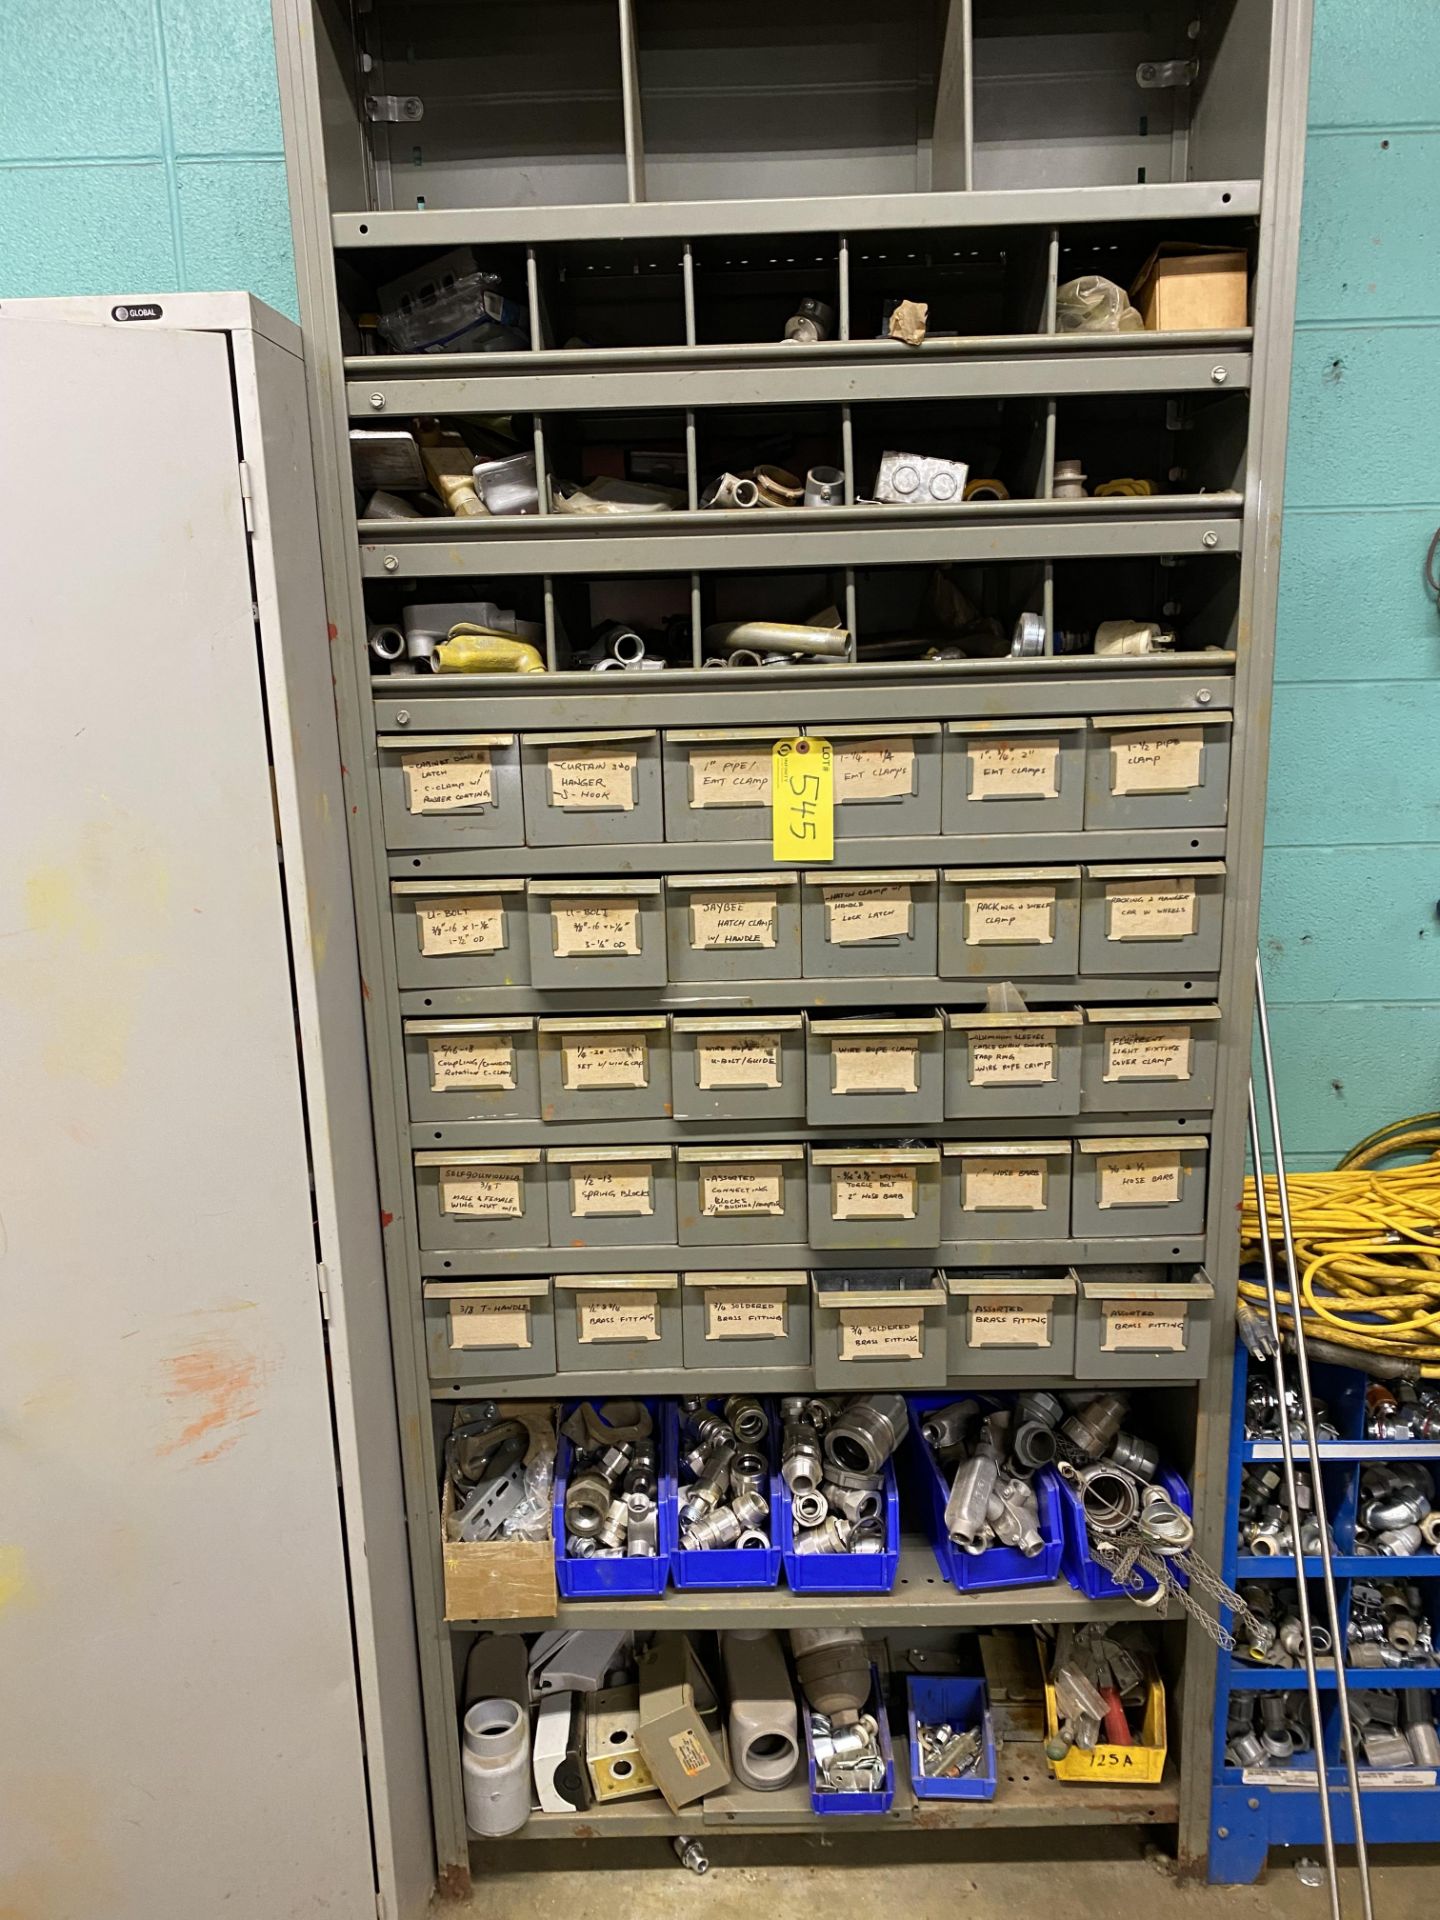 SHELVING UNIT W/ 11-LEVELS AND PARTS BINS W/ ELECTRICAL CONNECTORS, SPRING BLOCKS, CLAMPS, HARDWARE,